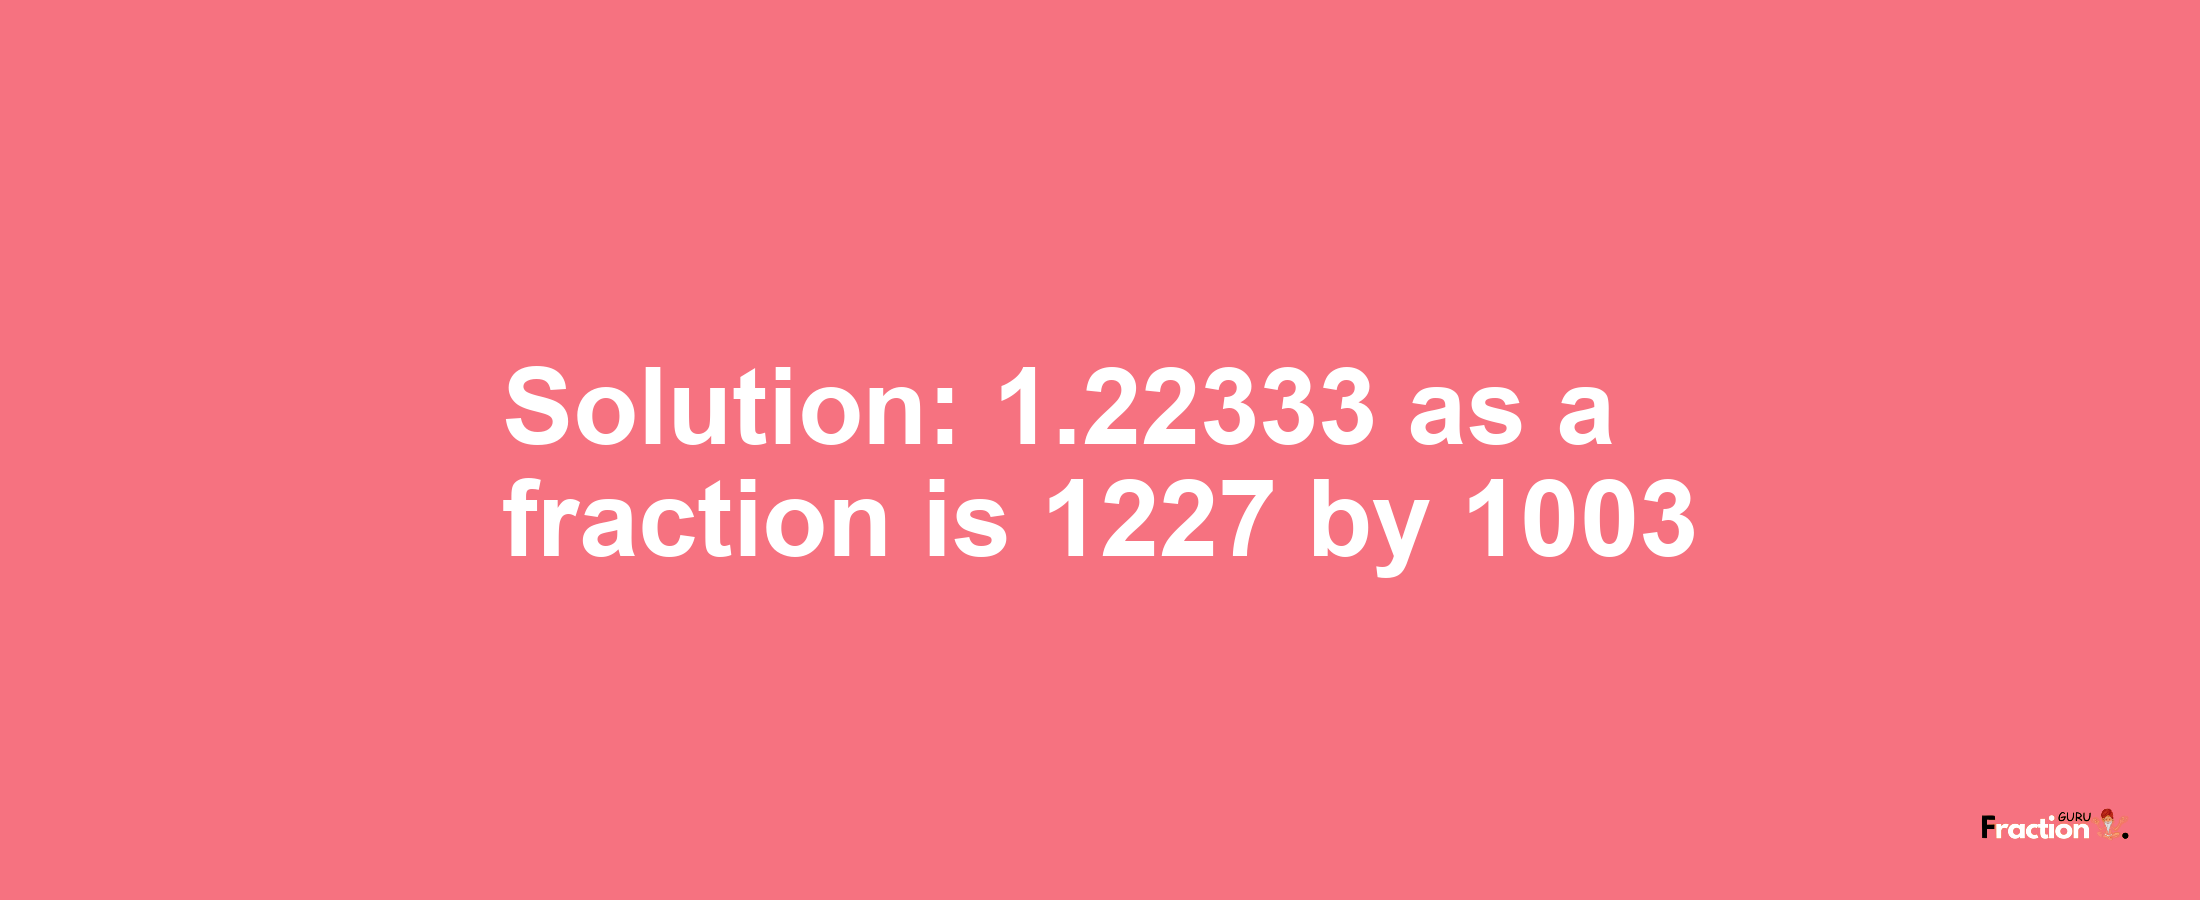 Solution:1.22333 as a fraction is 1227/1003